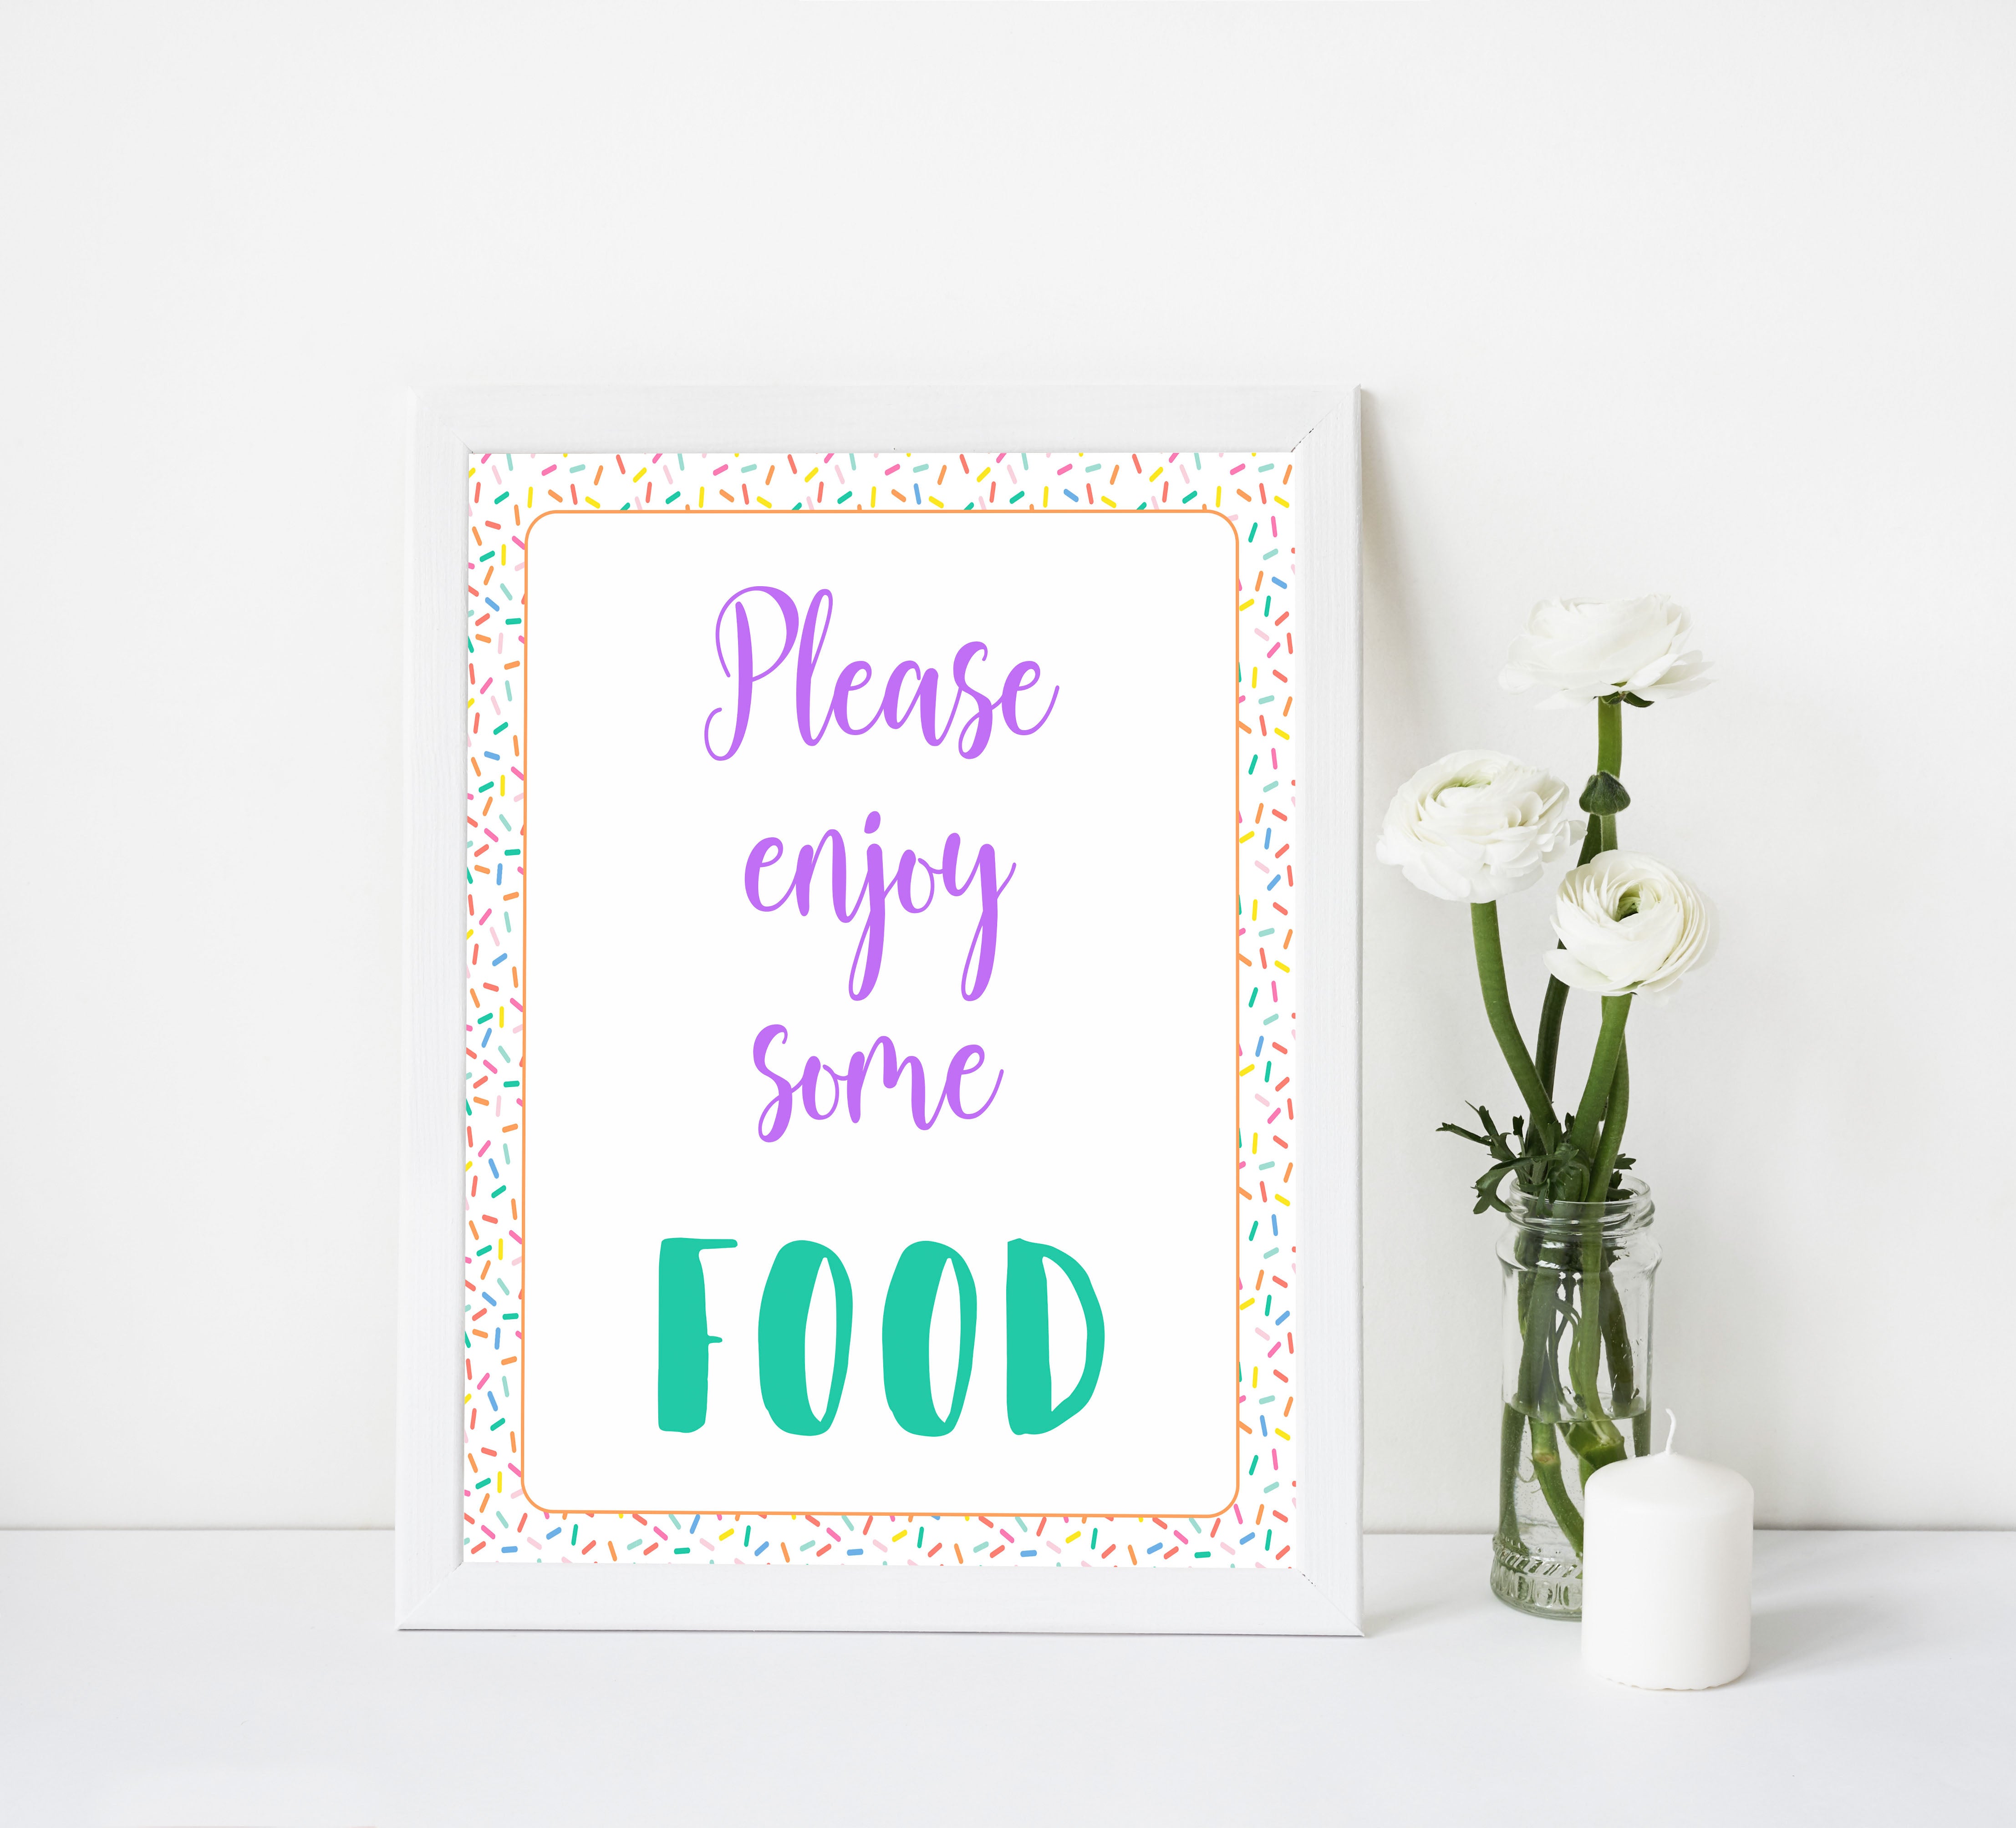 food baby table signs, food baby signs, Baby sprinkle baby decor, printable baby table signs, printable baby decor, baby sprinkle table signs, fun baby signs, baby sprinkle fun baby table signs